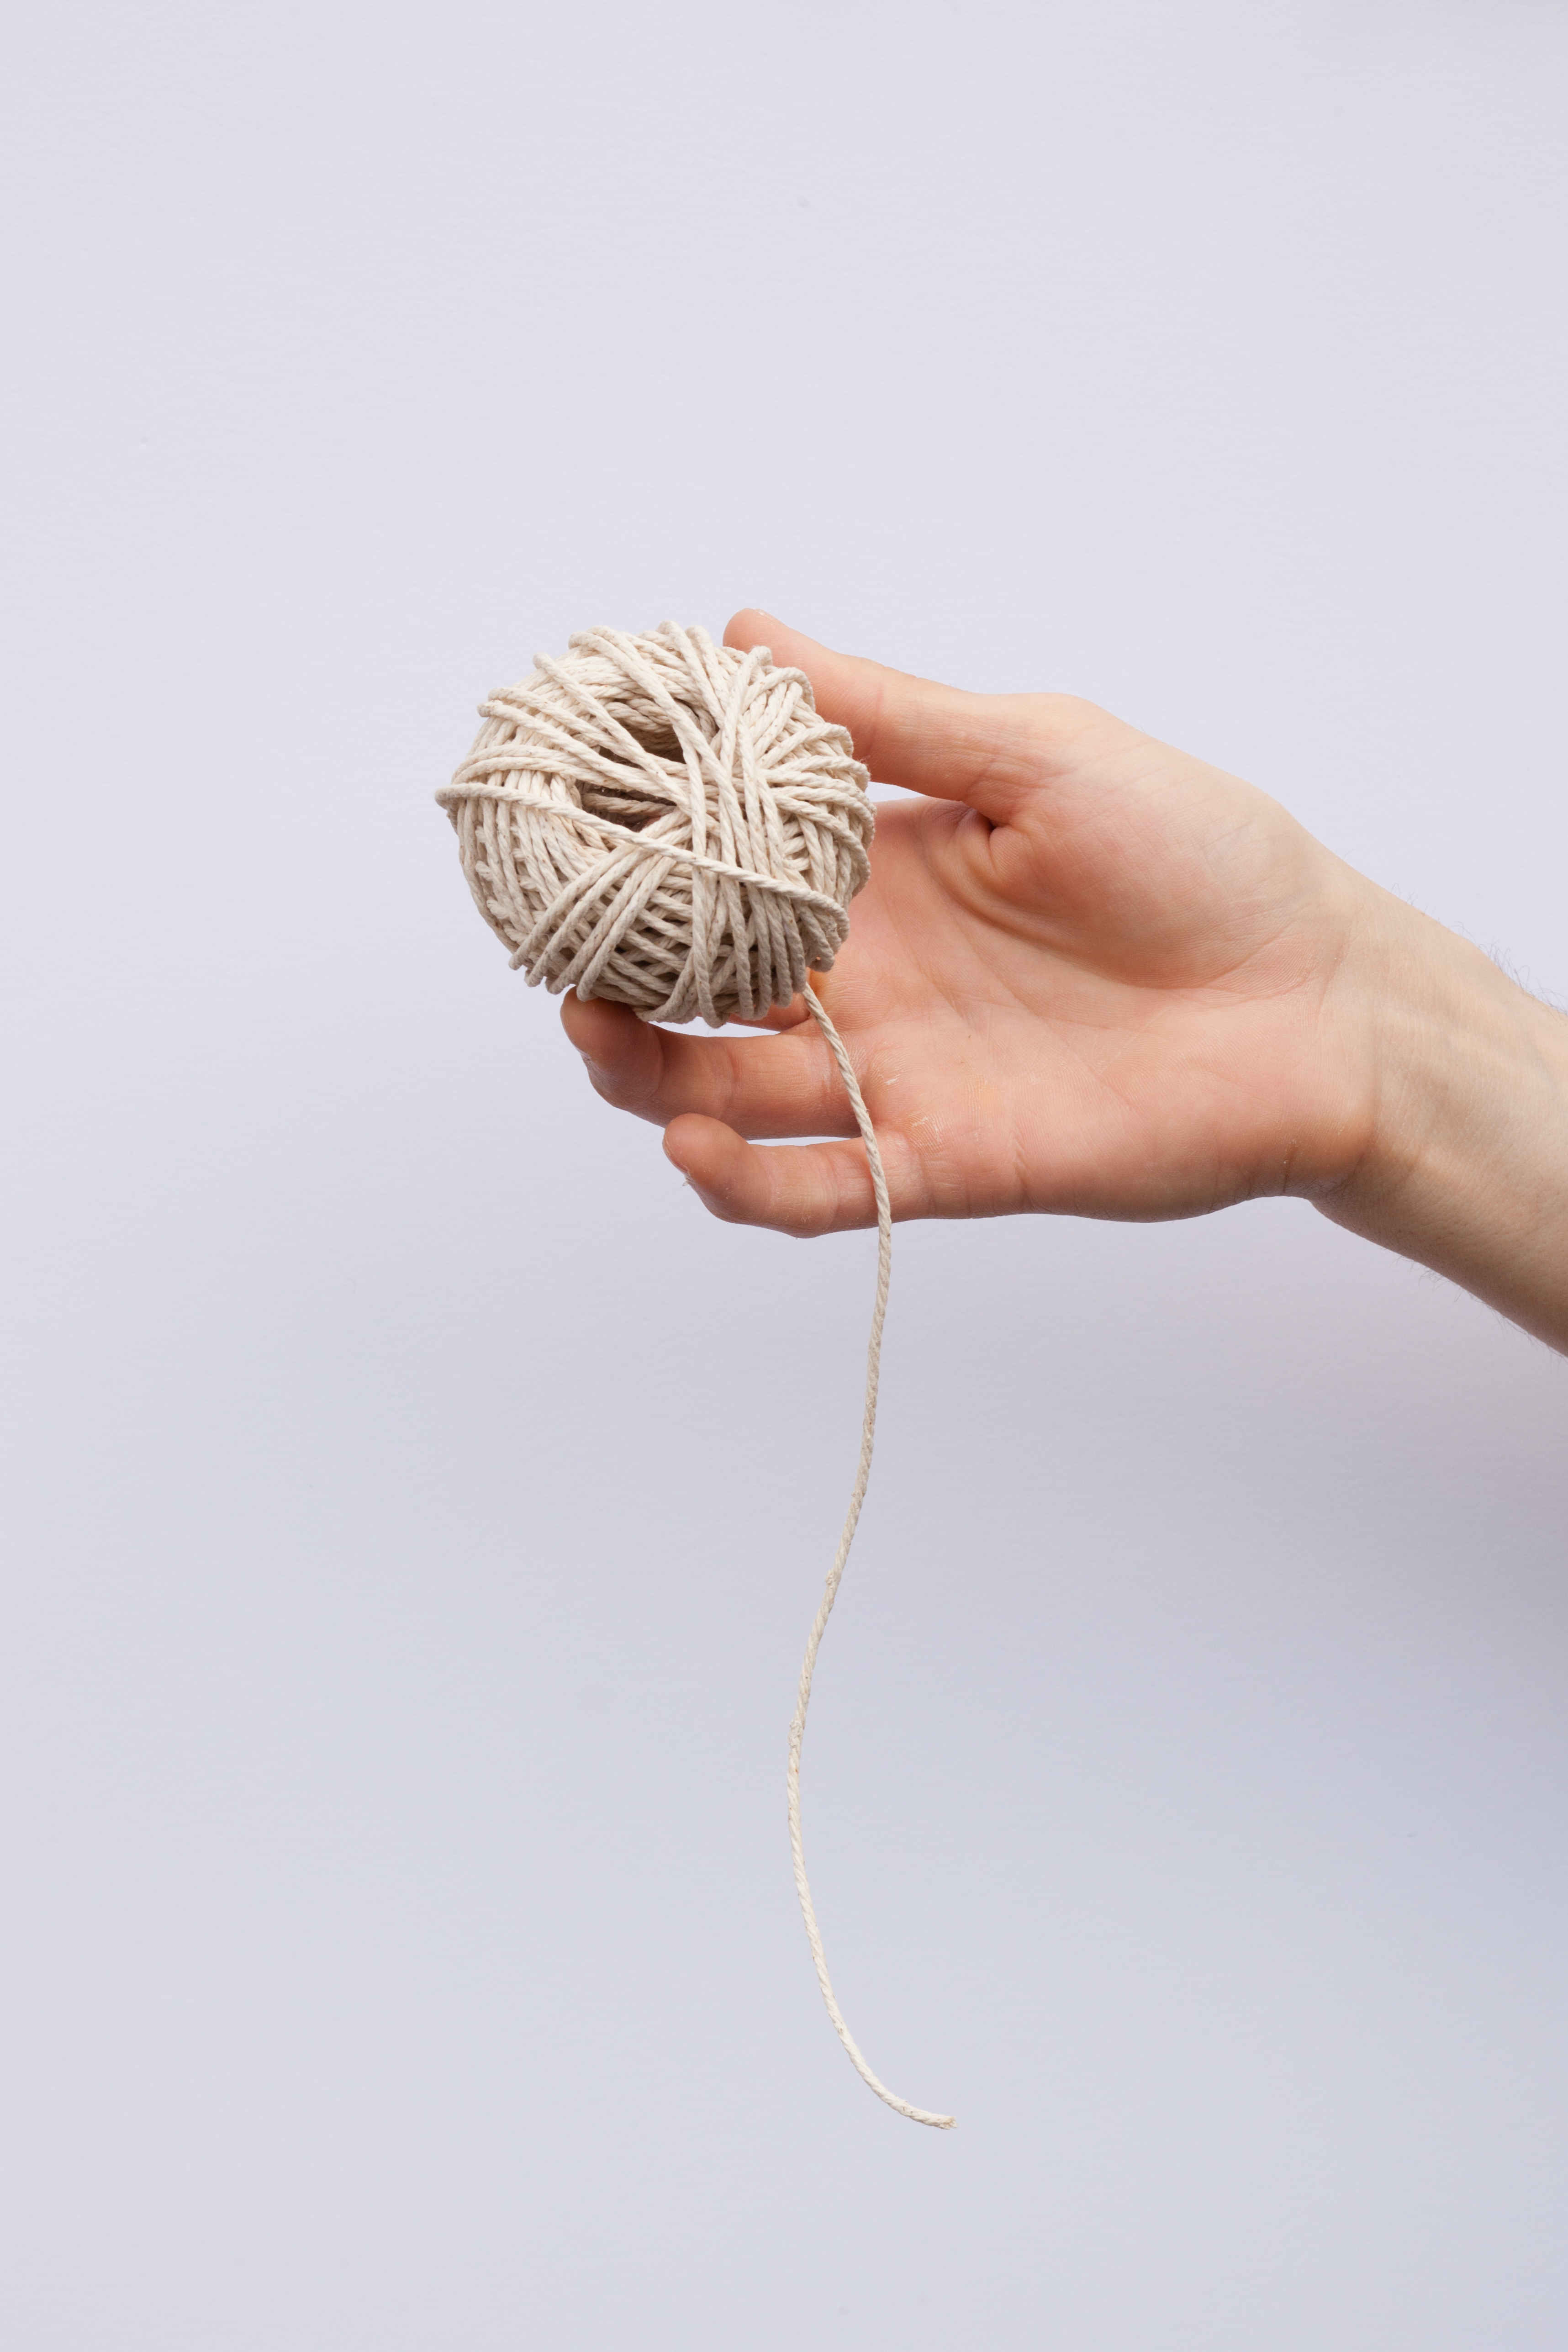 A person unraveling a ball of yarn.